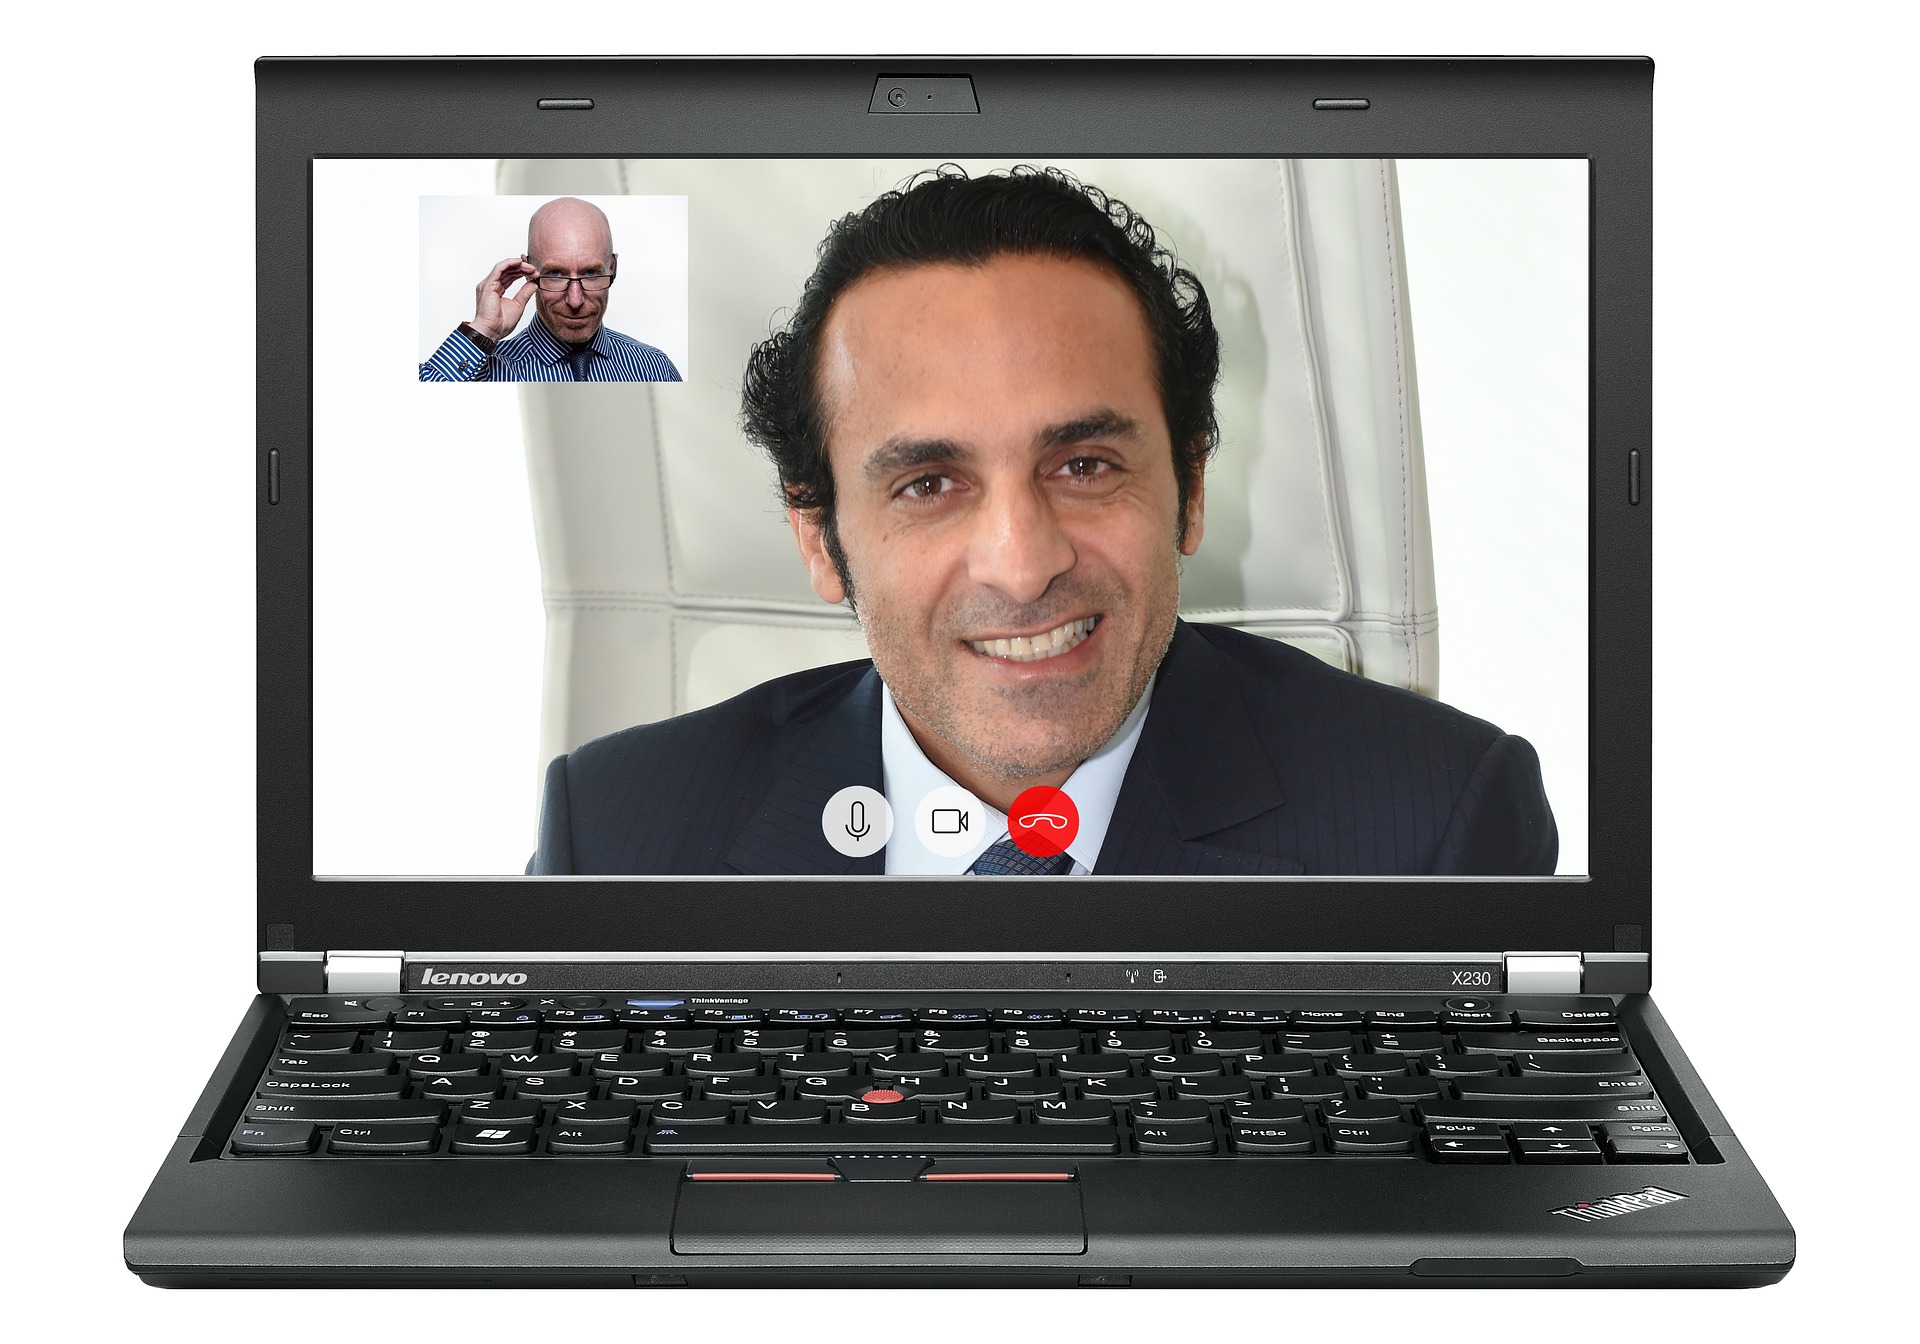 Important things to consider when video conferencing from home